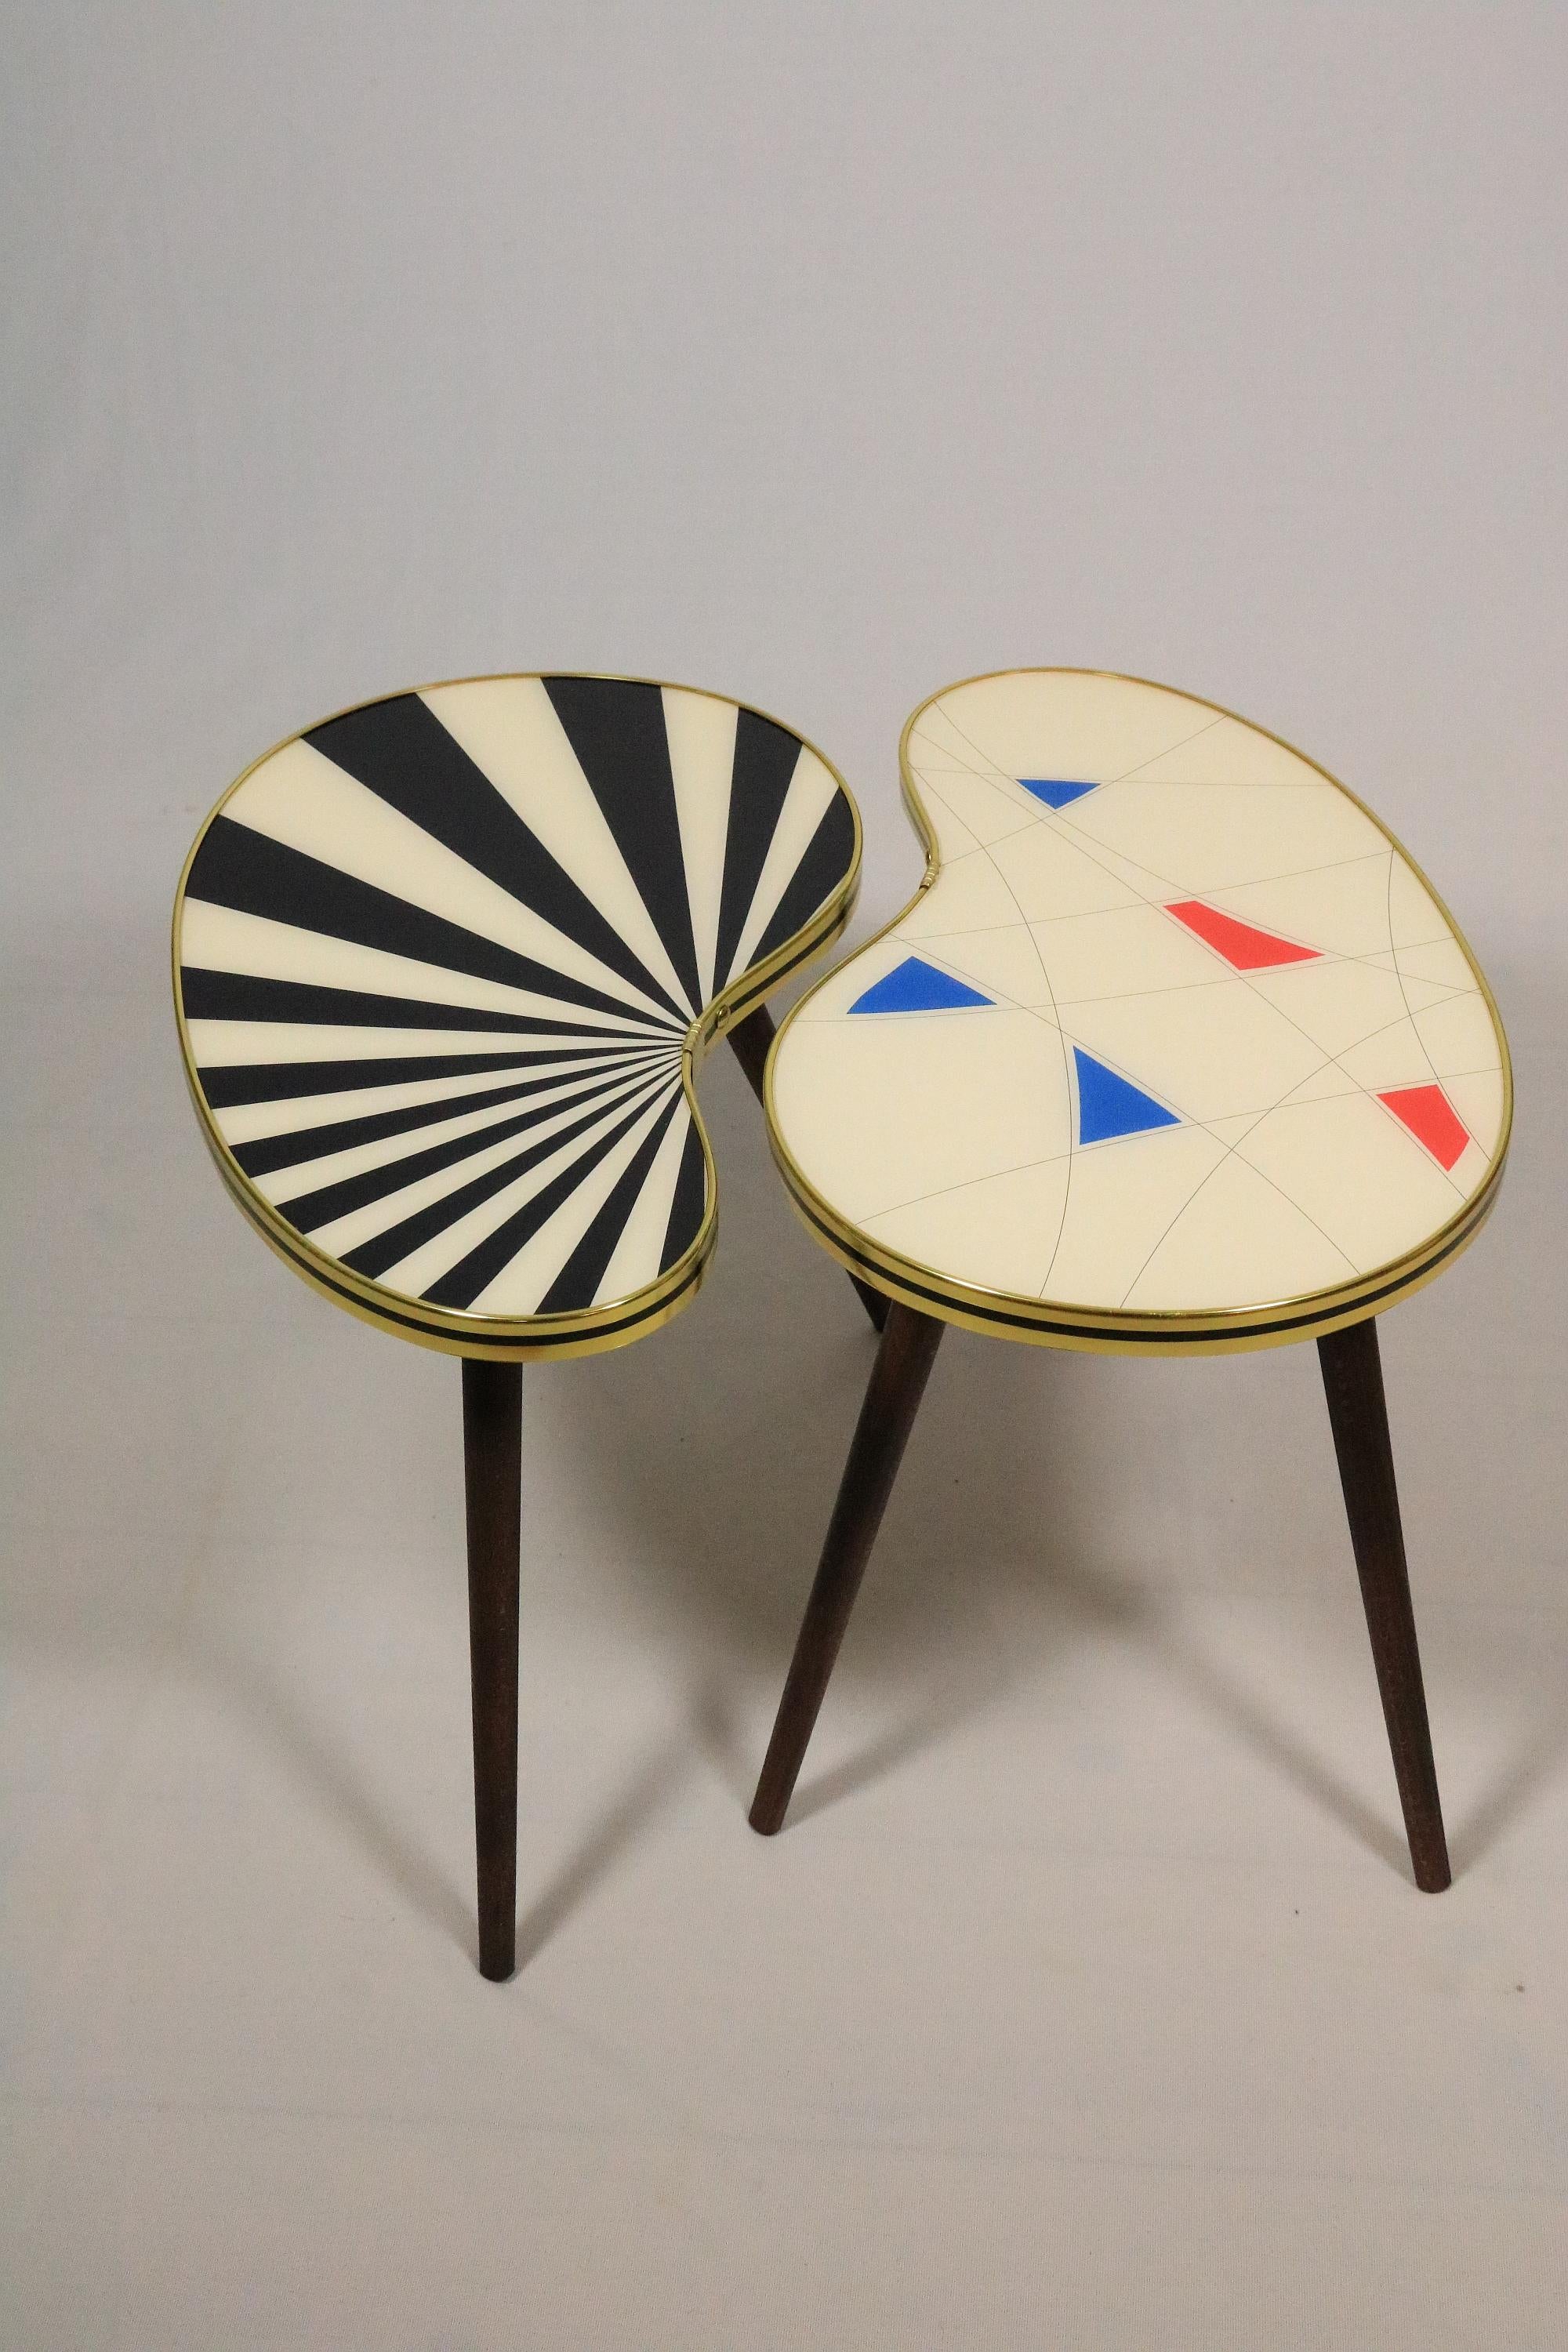 Small Side Table, Kidney Shaped, Pink-Taupe Stripes, 3 Elegant Legs, 50s Style For Sale 5